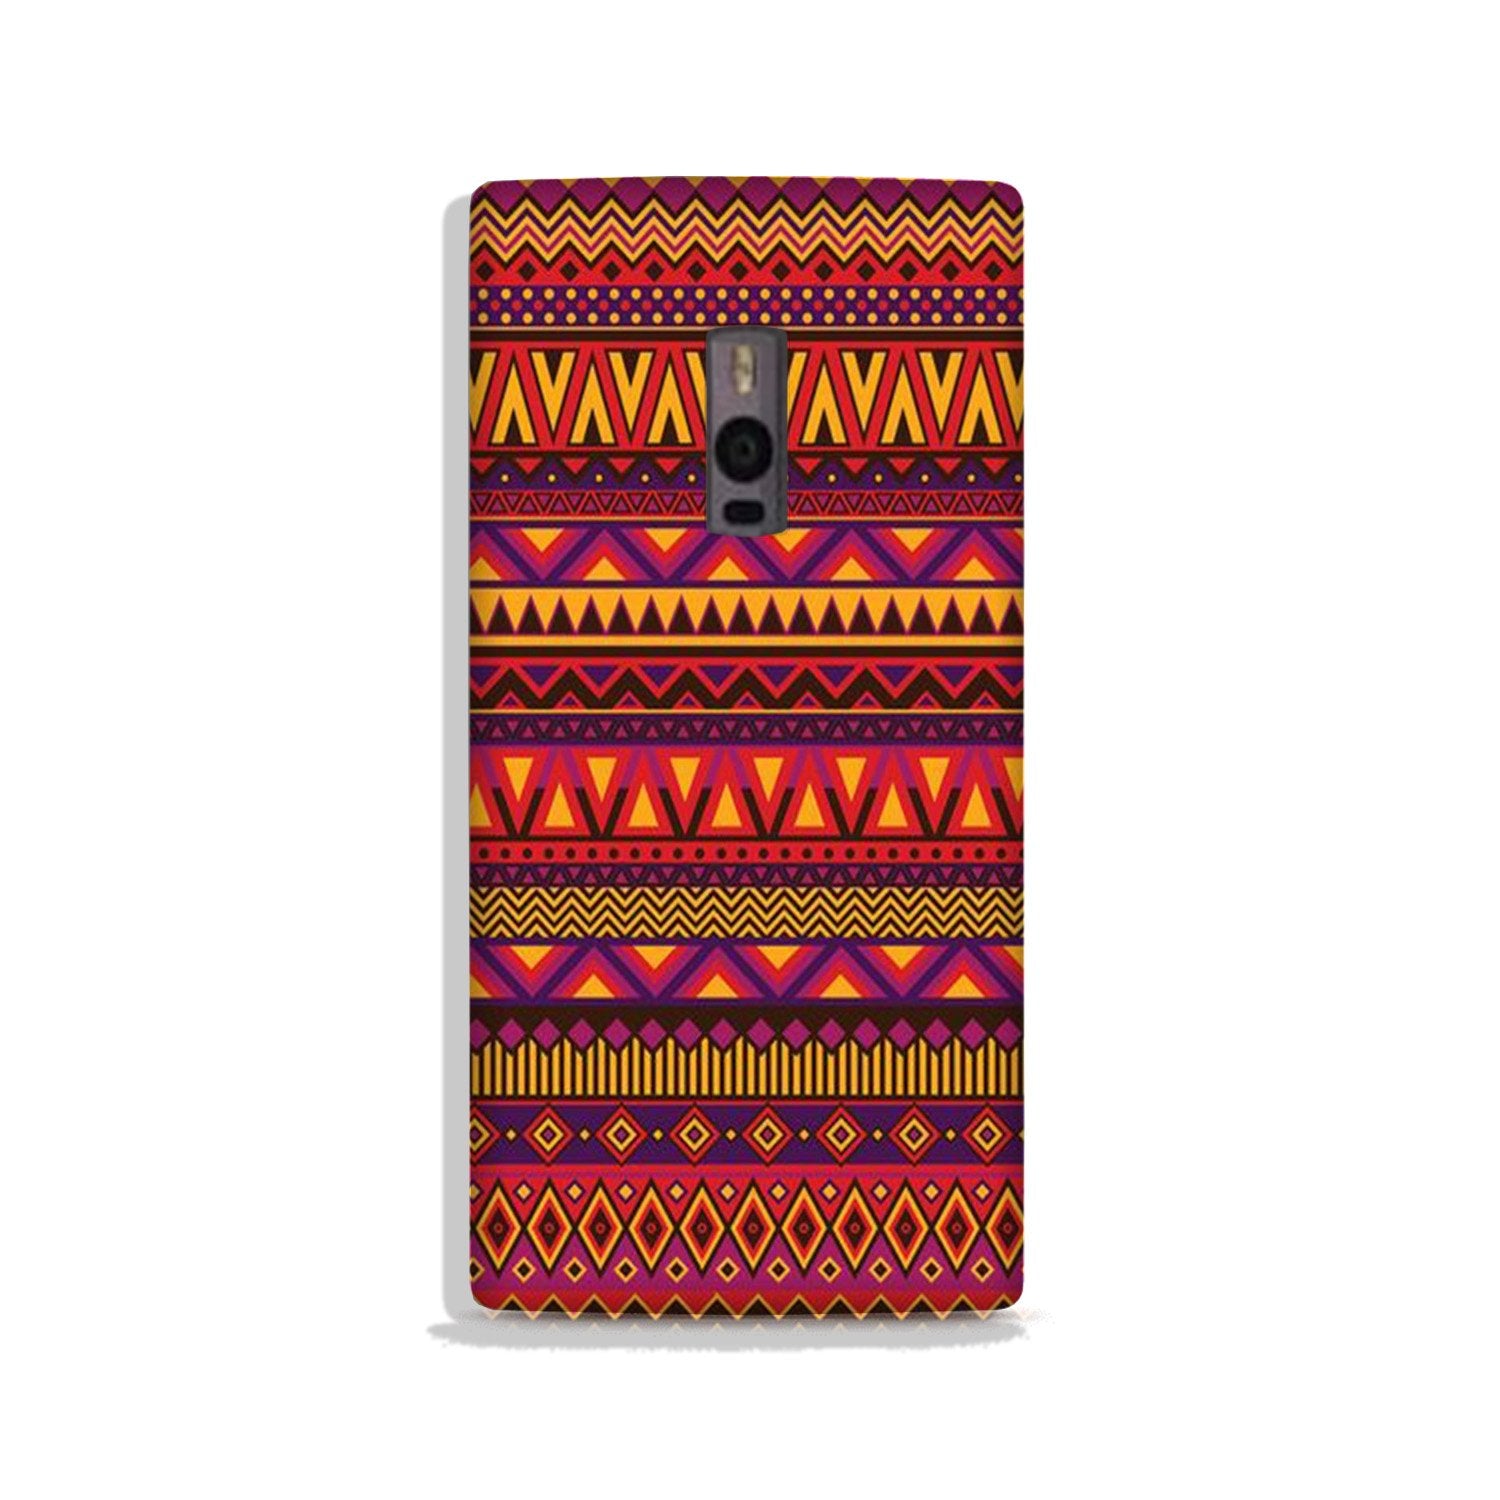 Zigzag line pattern2 Case for OnePlus 2